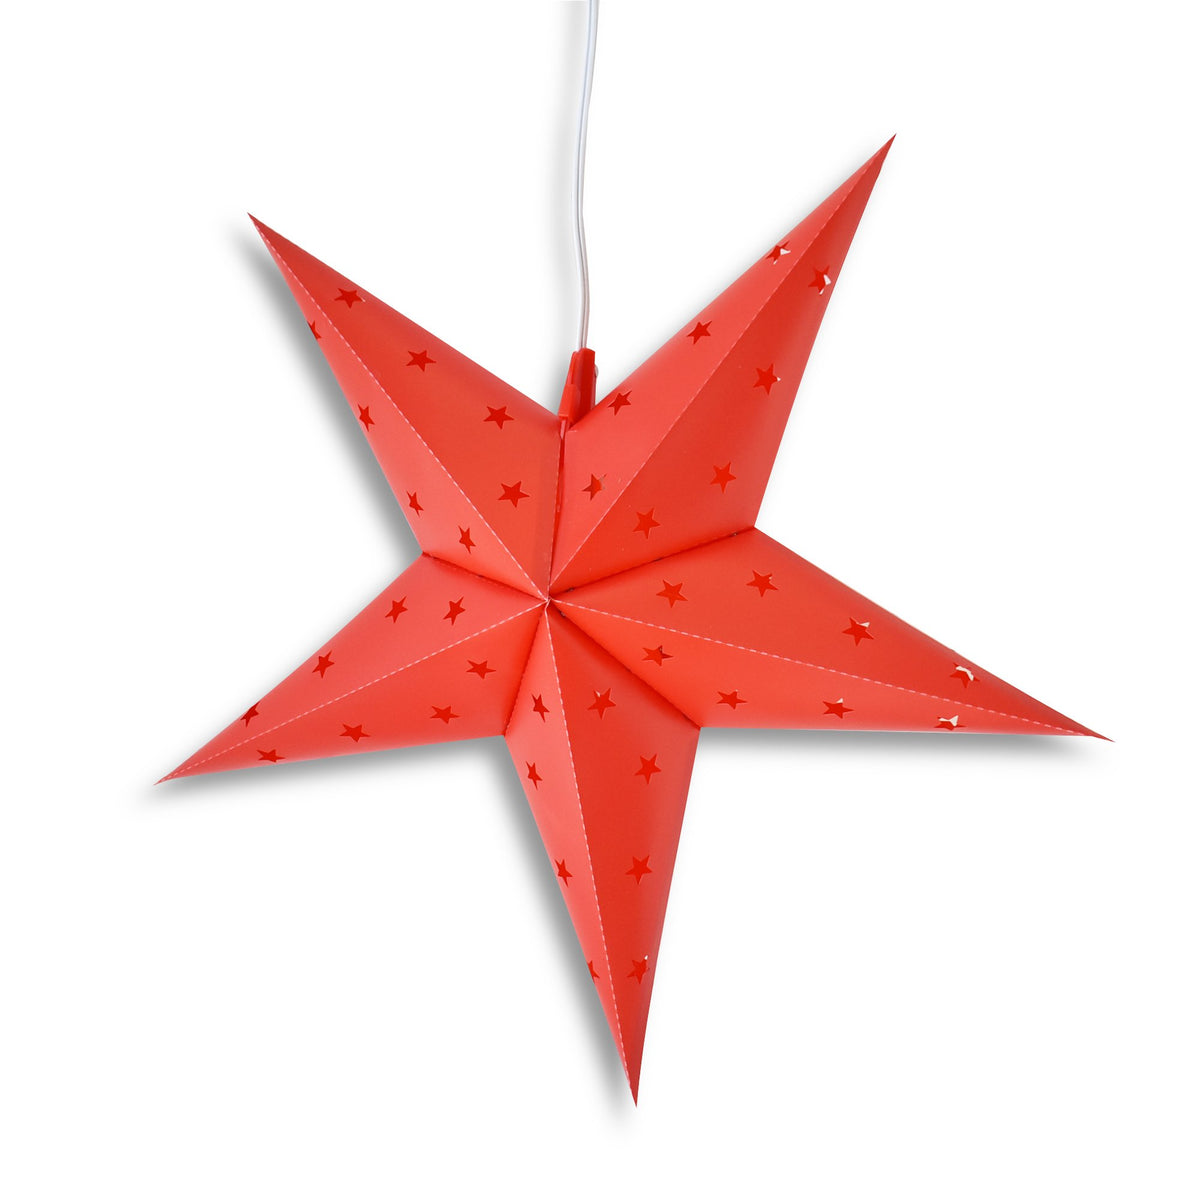 22&quot; Red Weatherproof Star Lantern Lamp, Hanging Decoration (Shade Only)